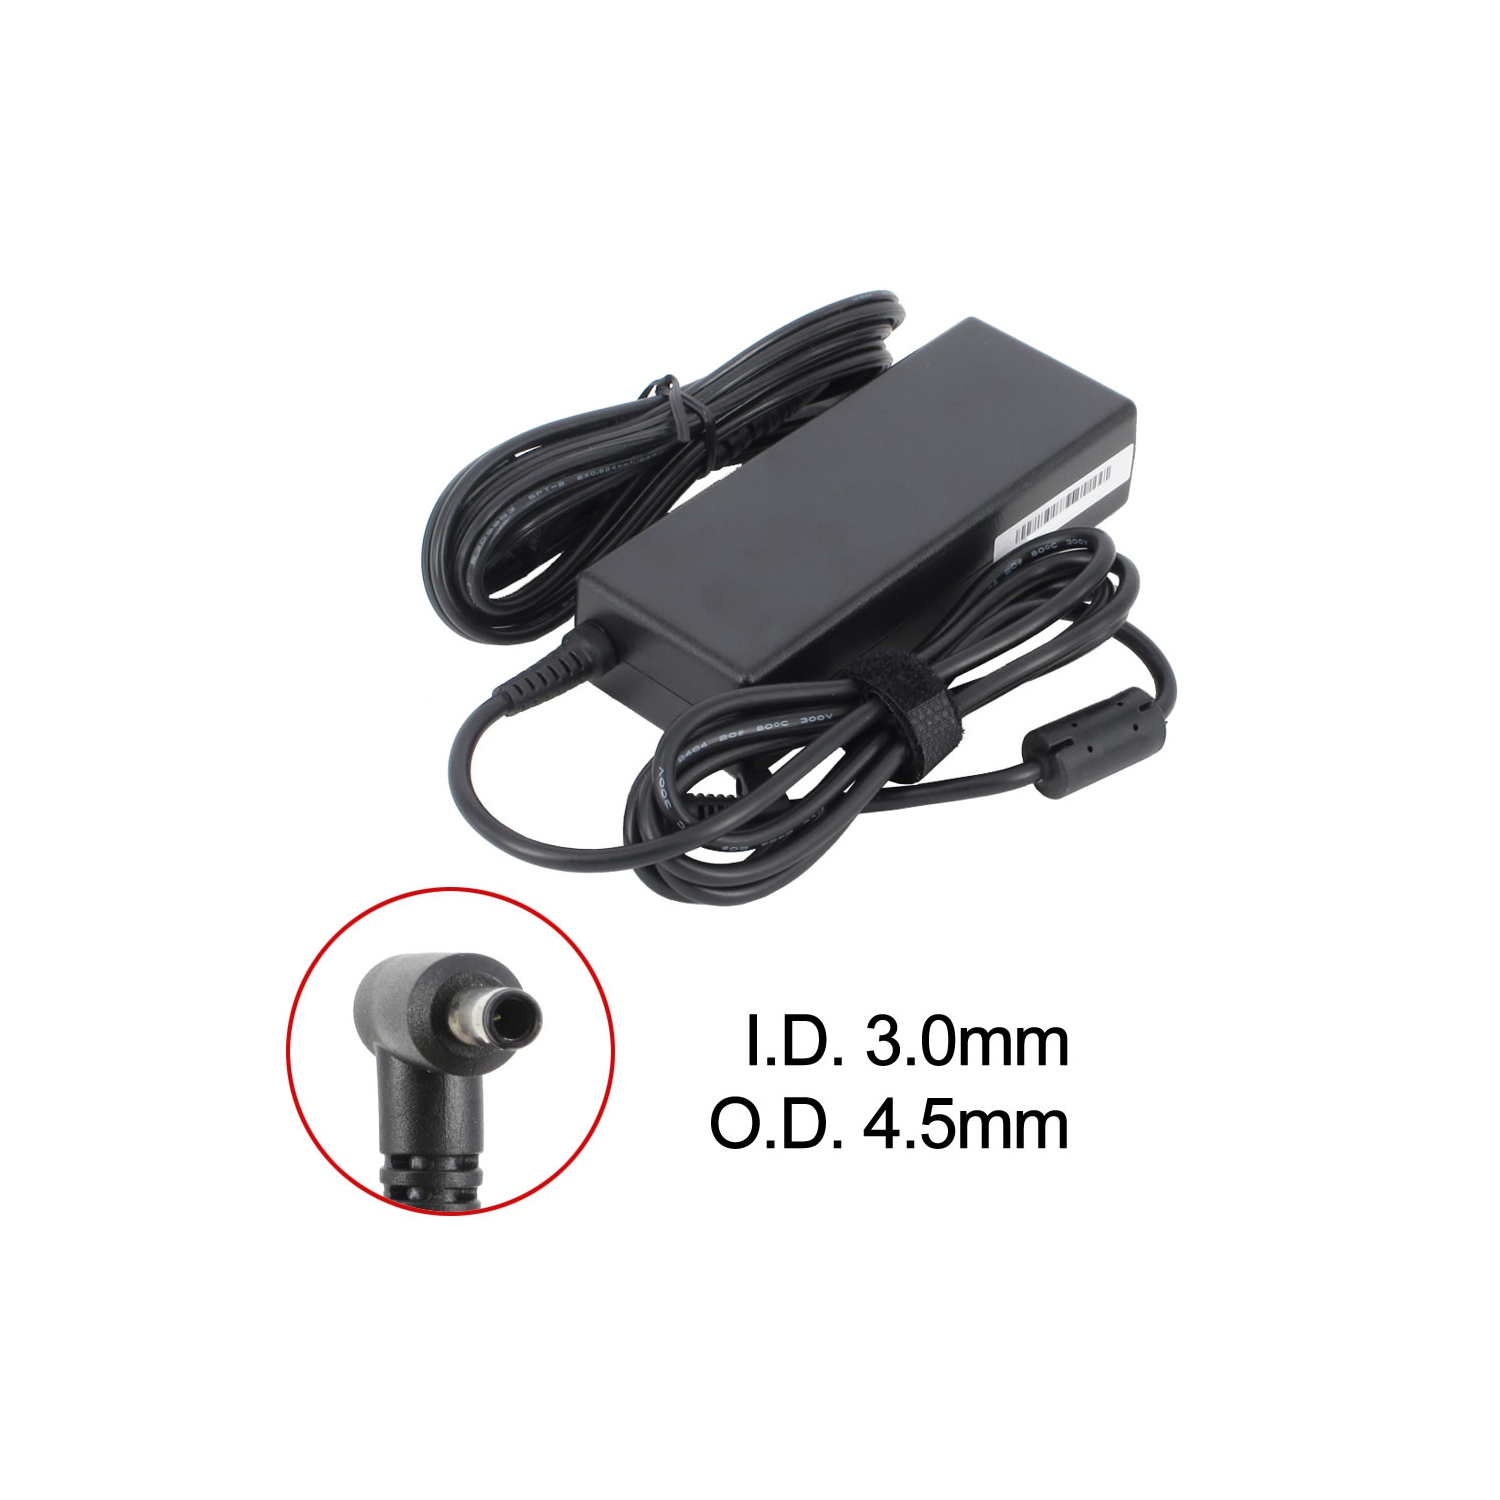 New Replacement Laptop AC Adapter for HP Pavilion 15-cw0027ca, 709986-002, 710412-001, 741727-001, PA-1650-32HE